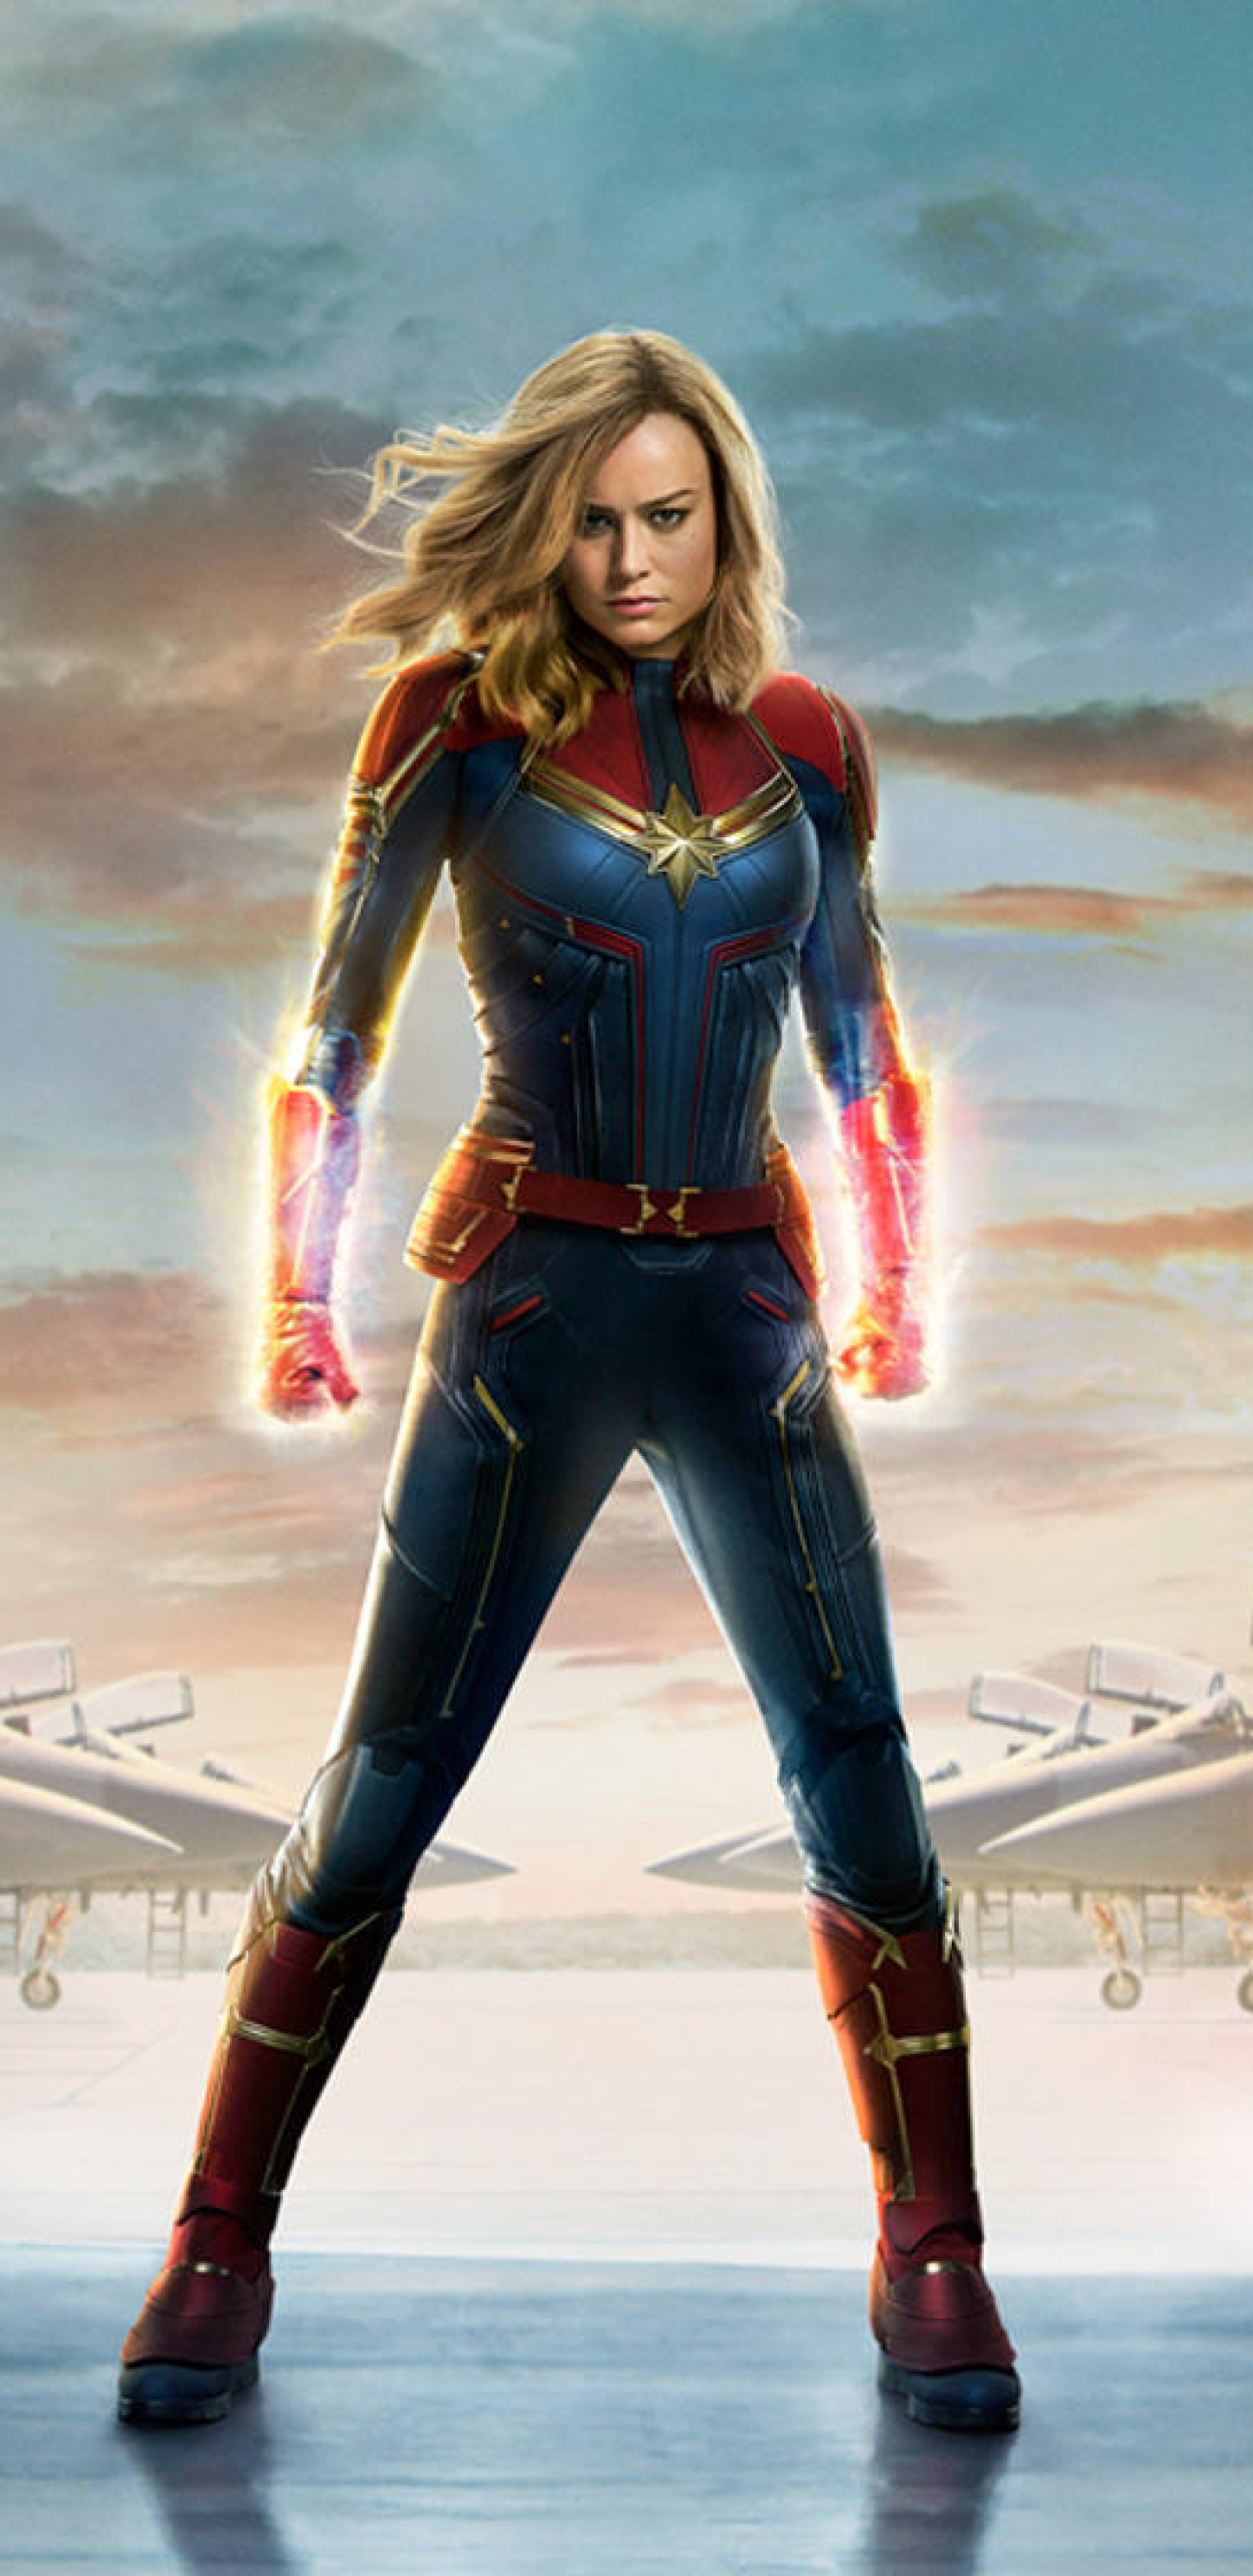 1440x2960 Captain Marvel 2019 Movie Official Poster